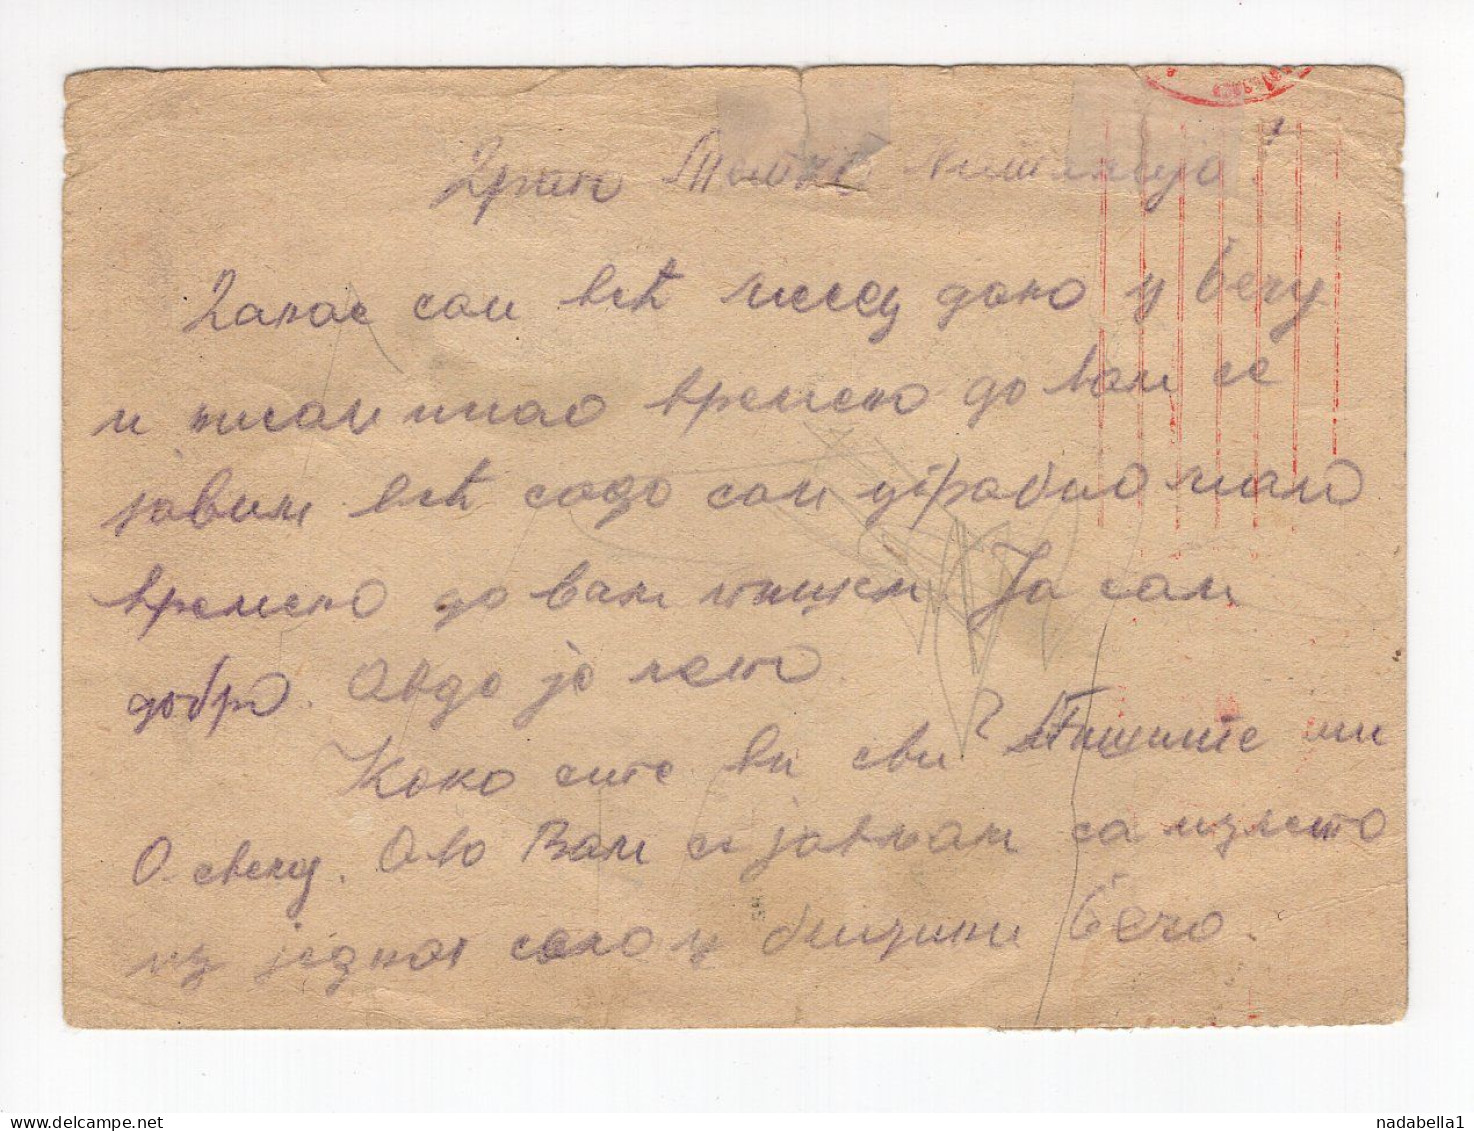 1944. GERMANY,VIENNA - KLOSTERNEUBURG TO SERBIA,AIRMAIL STATIONERY CARD,USED - Airmail & Zeppelin